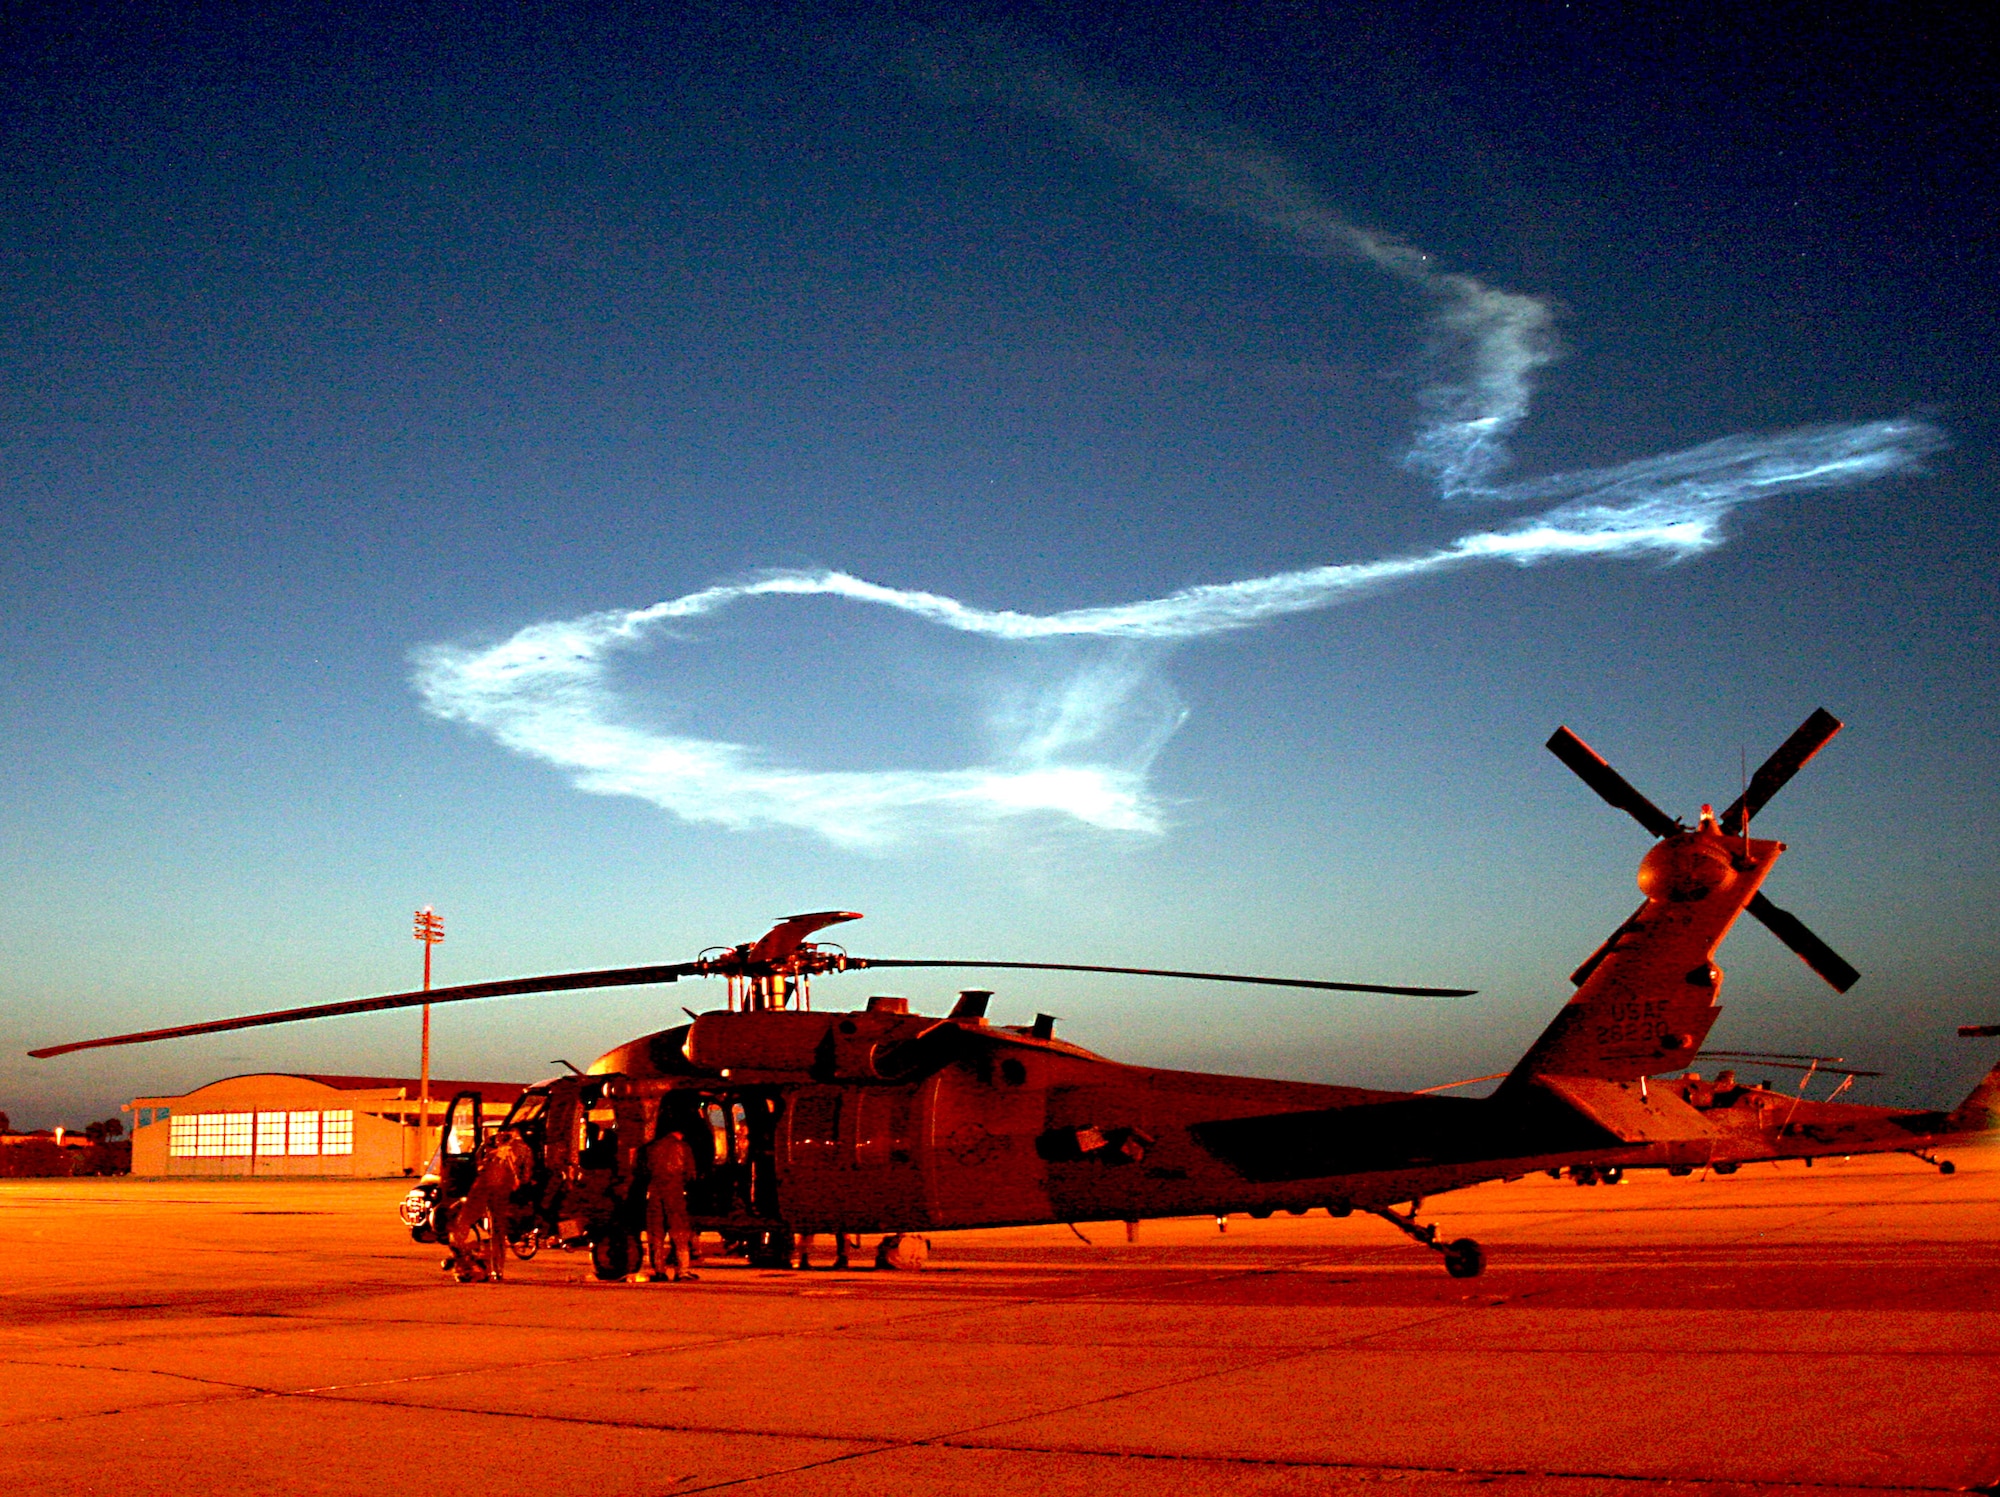 The crew of a 920th Rescue Wing HH-60G Pave Hawk helicopter conducts post-flight operations after supporting a NASA Delta II rocket launch from Kennedy Space Center just before 5:30 a.m. Aug. 4 at Patrick Air Force Base, Fla. Reservists from the 920th RQW are responsible for clearing the Eastern range before all space shuttle and rocket launches to ensure no boats are in the launch path. The lazy twist of smoke in the early-morning sky is all that remains from the trail left by the rocket, which carried the Phoenix spacecraft on the first leg of its trip to Mars' arctic plain. (U.S. Air Force photo/Staff Sgt. Paul Flipse)
